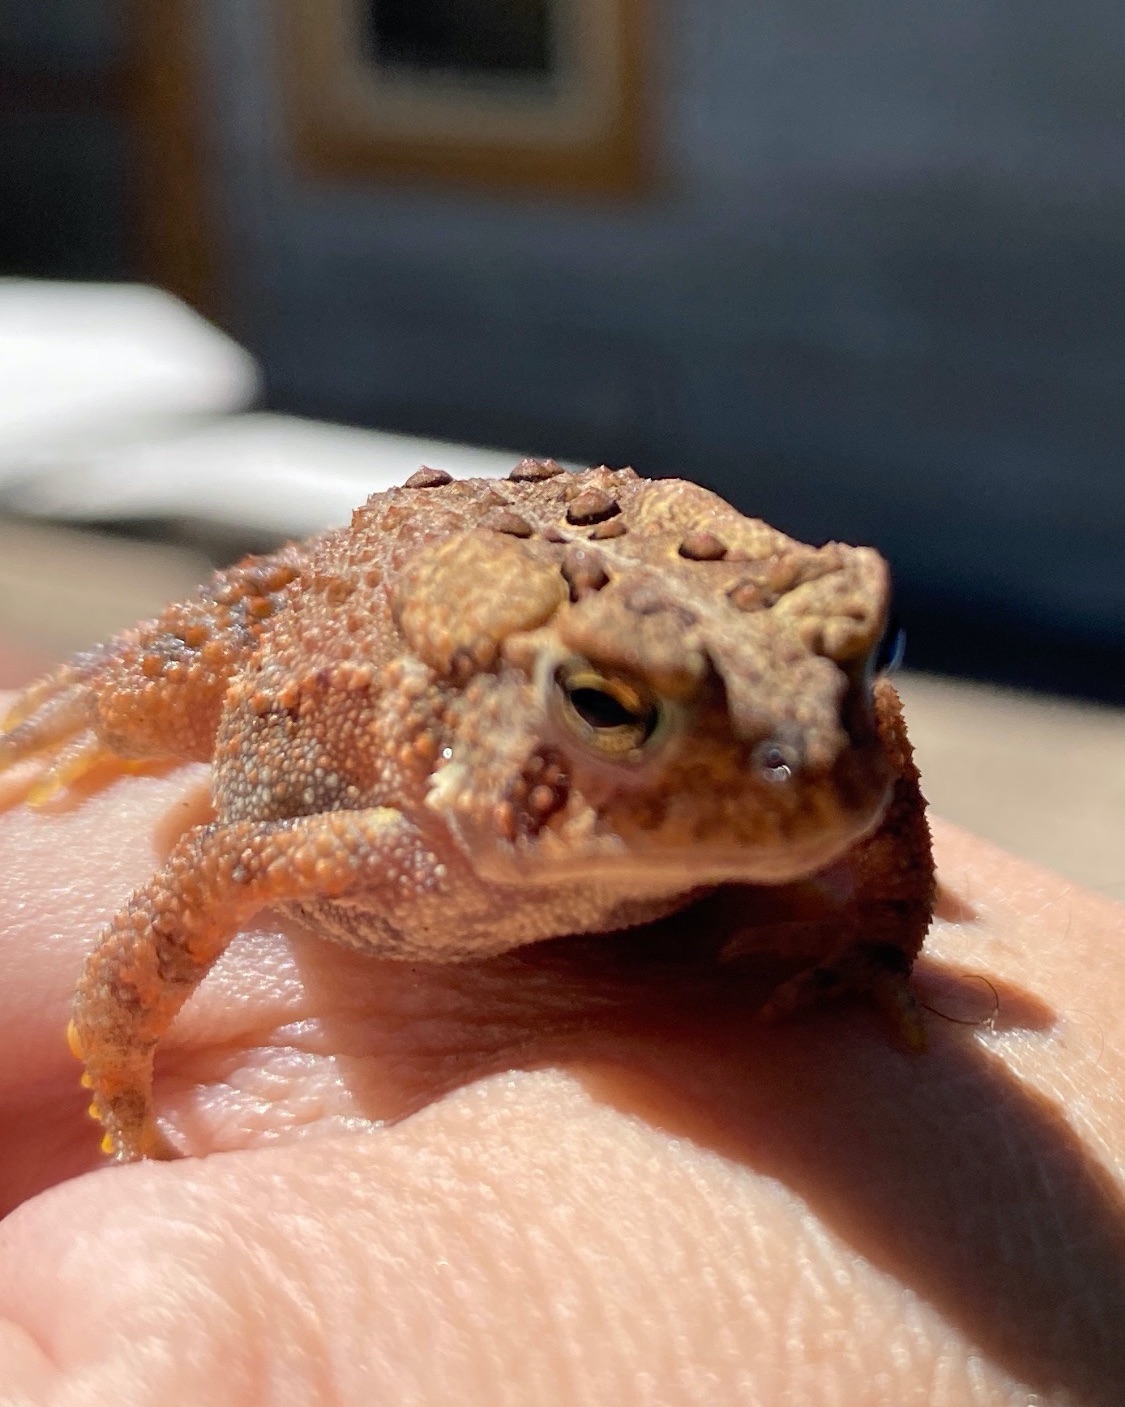 A frog my dad found and held an impromptu iPhone photo shoot with, Cecil.